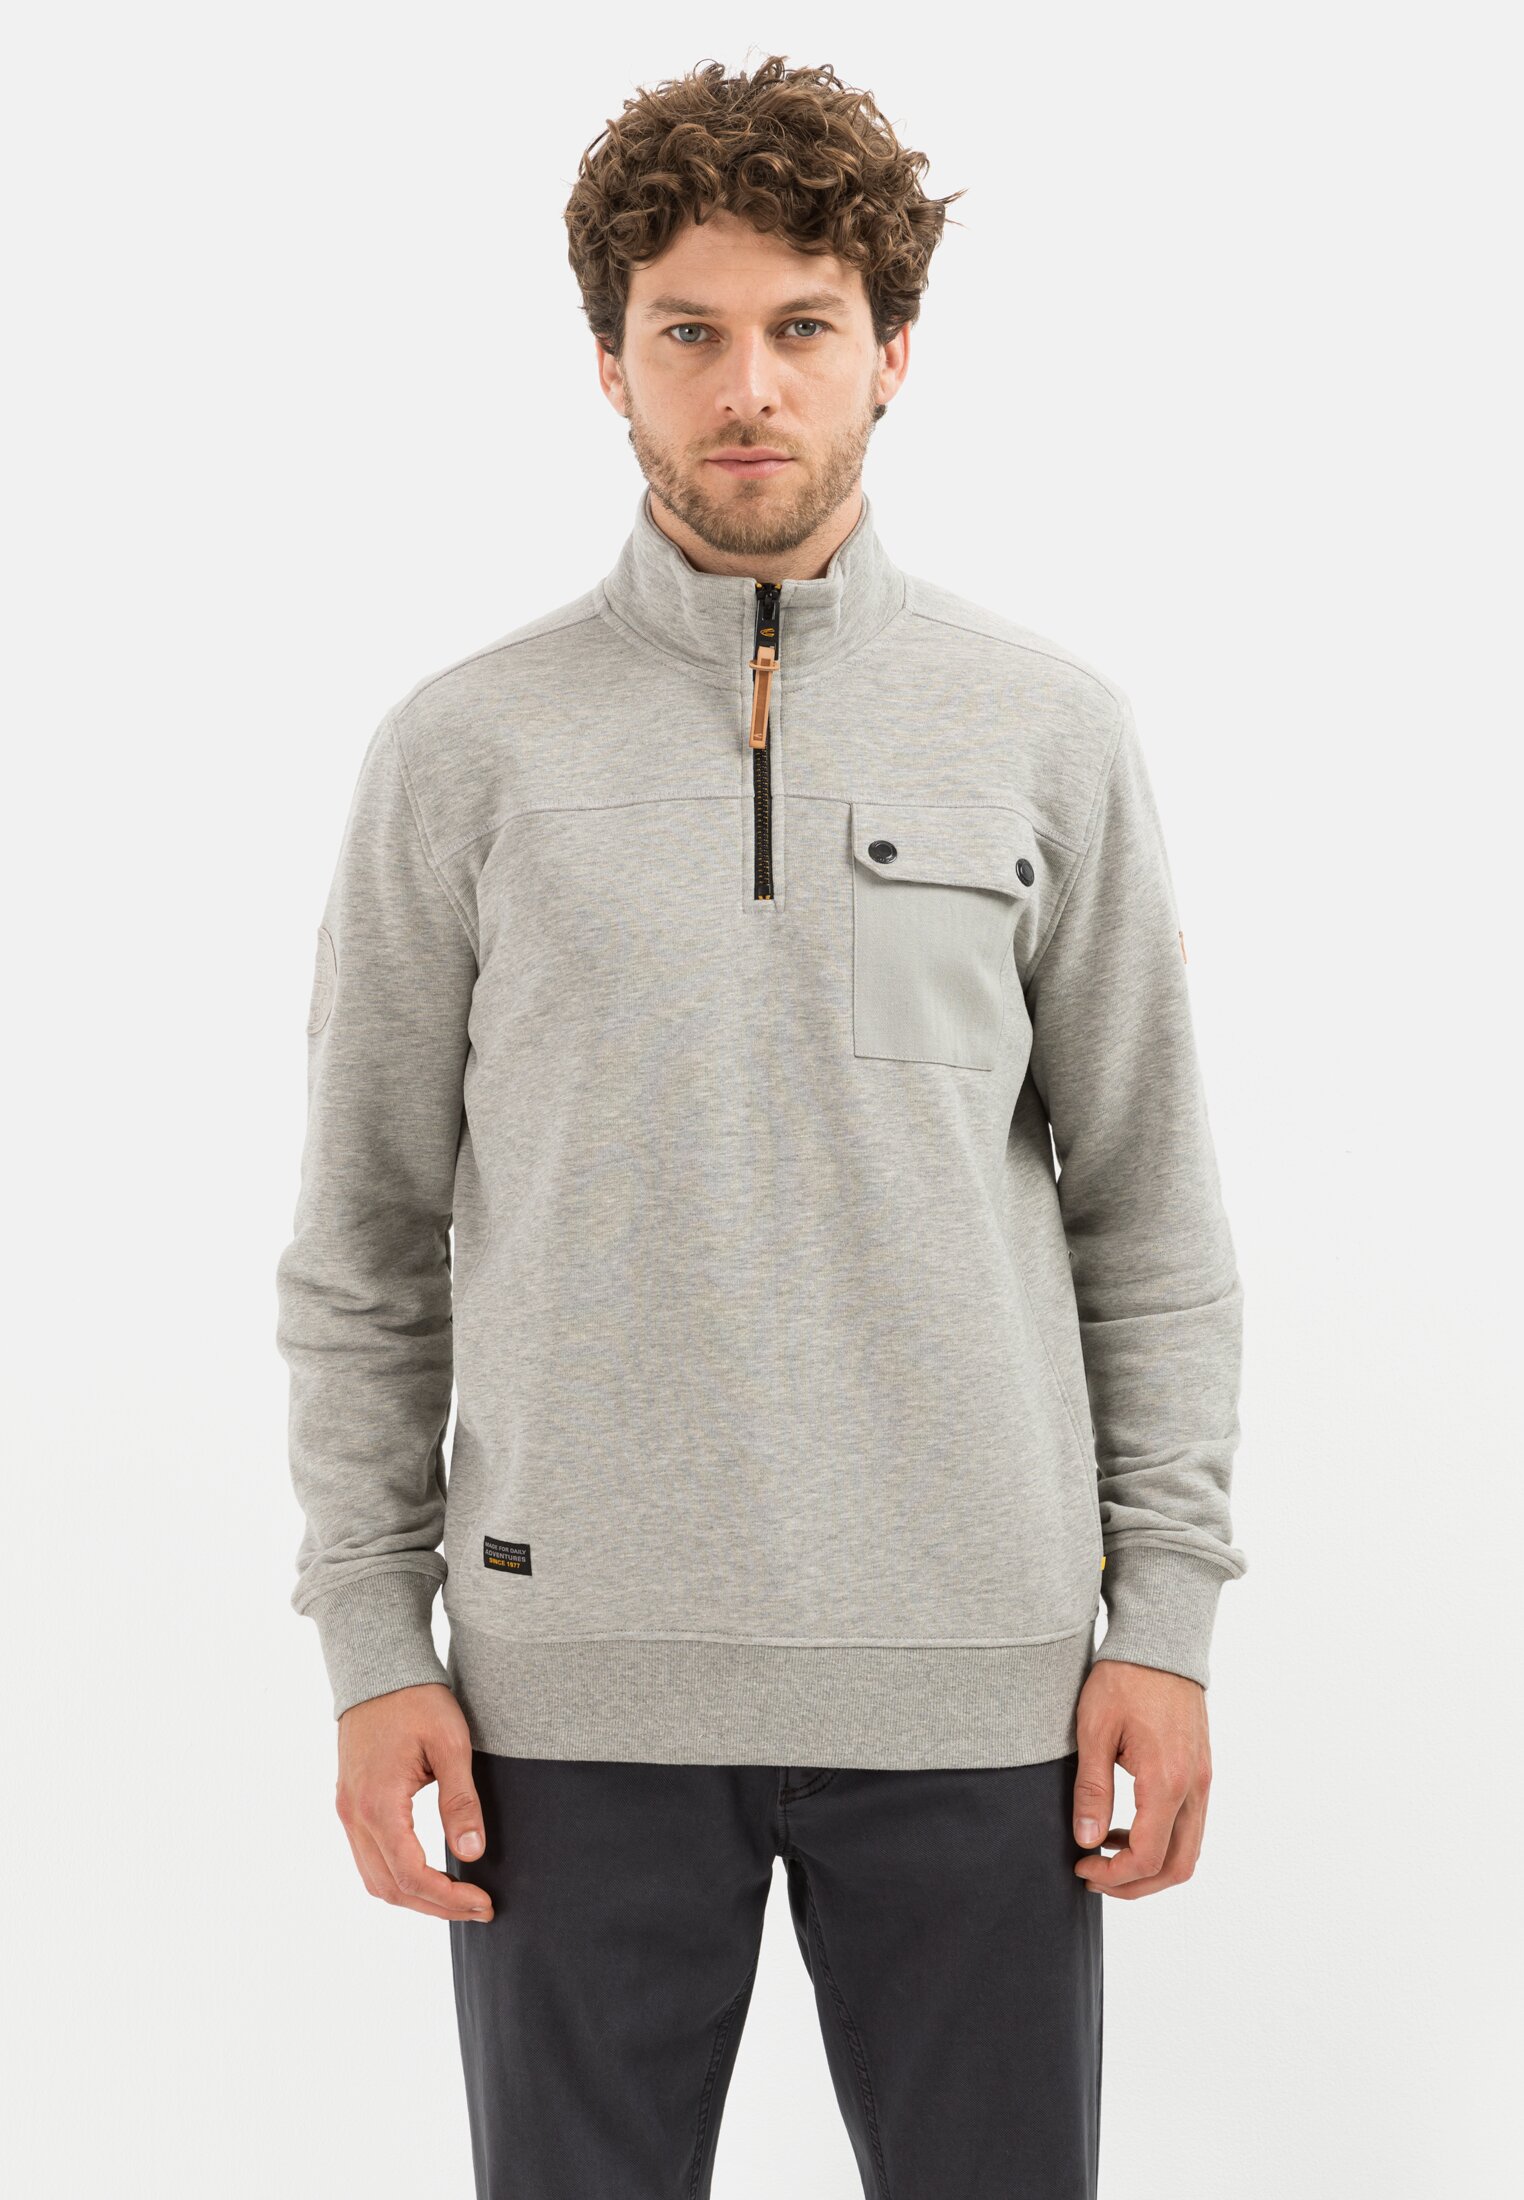 Camel Active Sweatshirt Troyer with stand-up collar